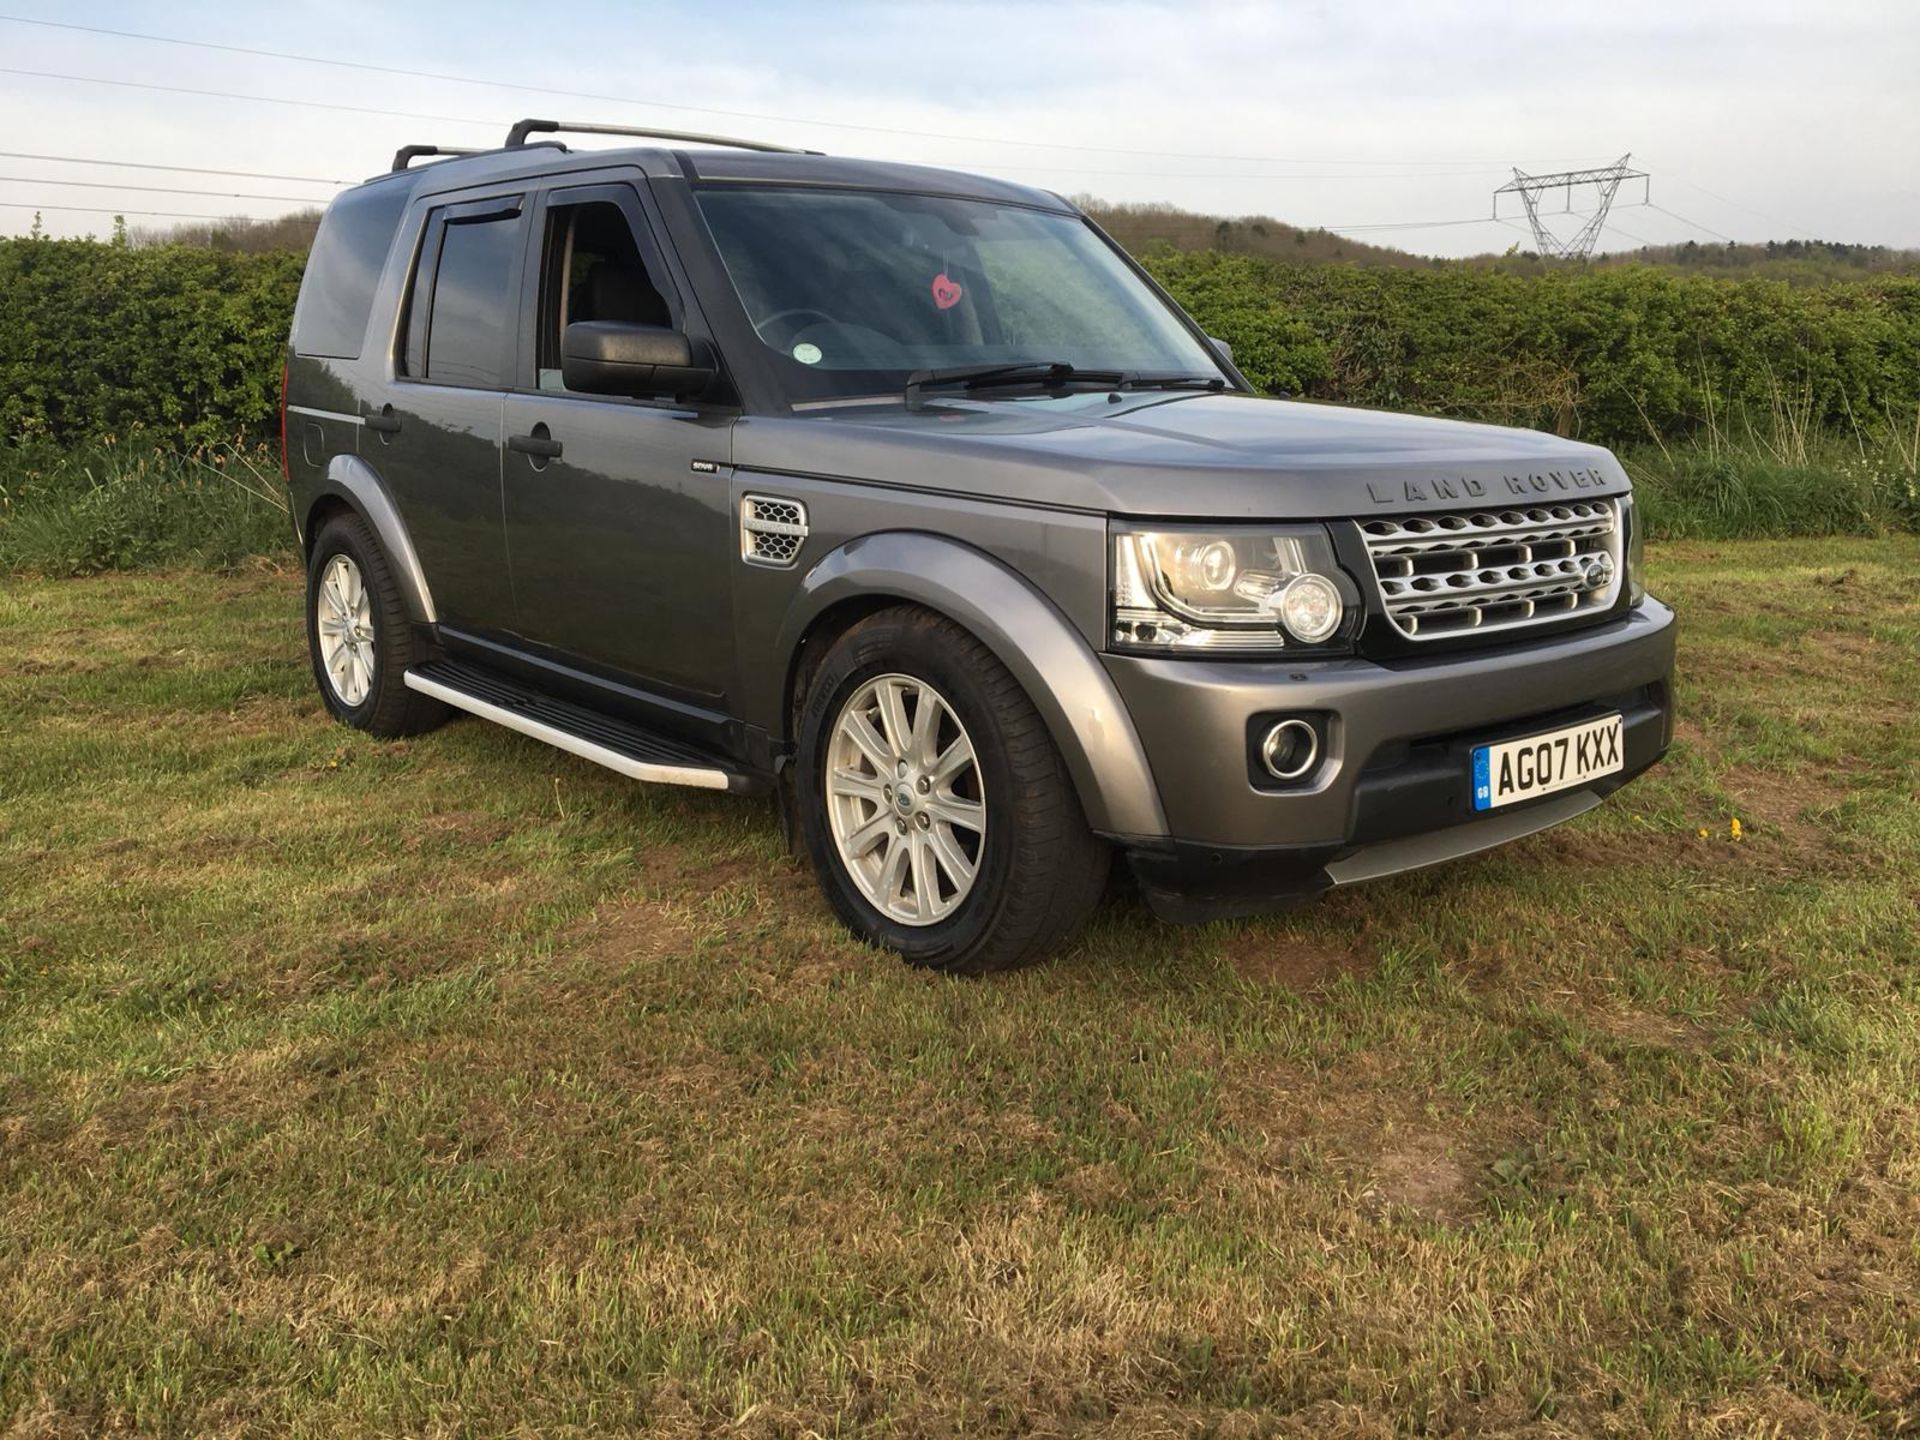 2007/07 REG LAND ROVER DISCOVERY 3 TDV6 SE AUTOMATIC 2.7 DIESEL 4X4, 7 SEATS, FACE-LIFT *NO VAT* - Image 2 of 16